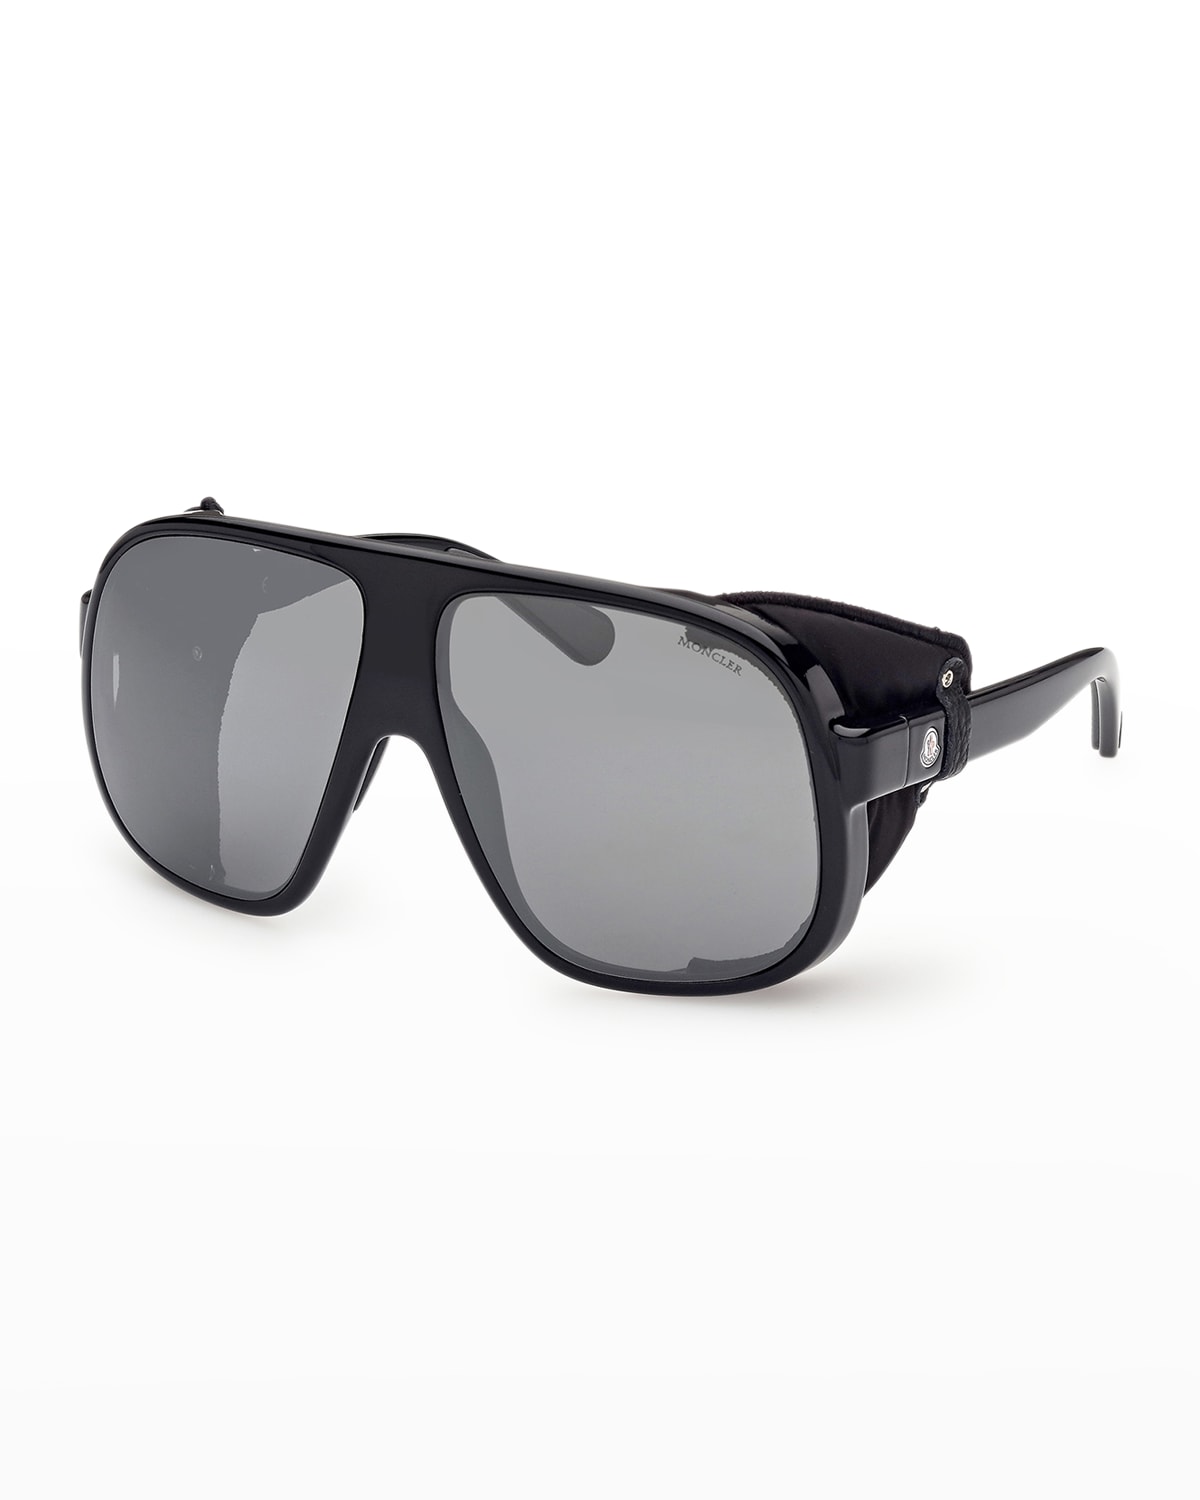 Diffractor Square Injection Plastic Sunglasses w/ Side Shield Blinders